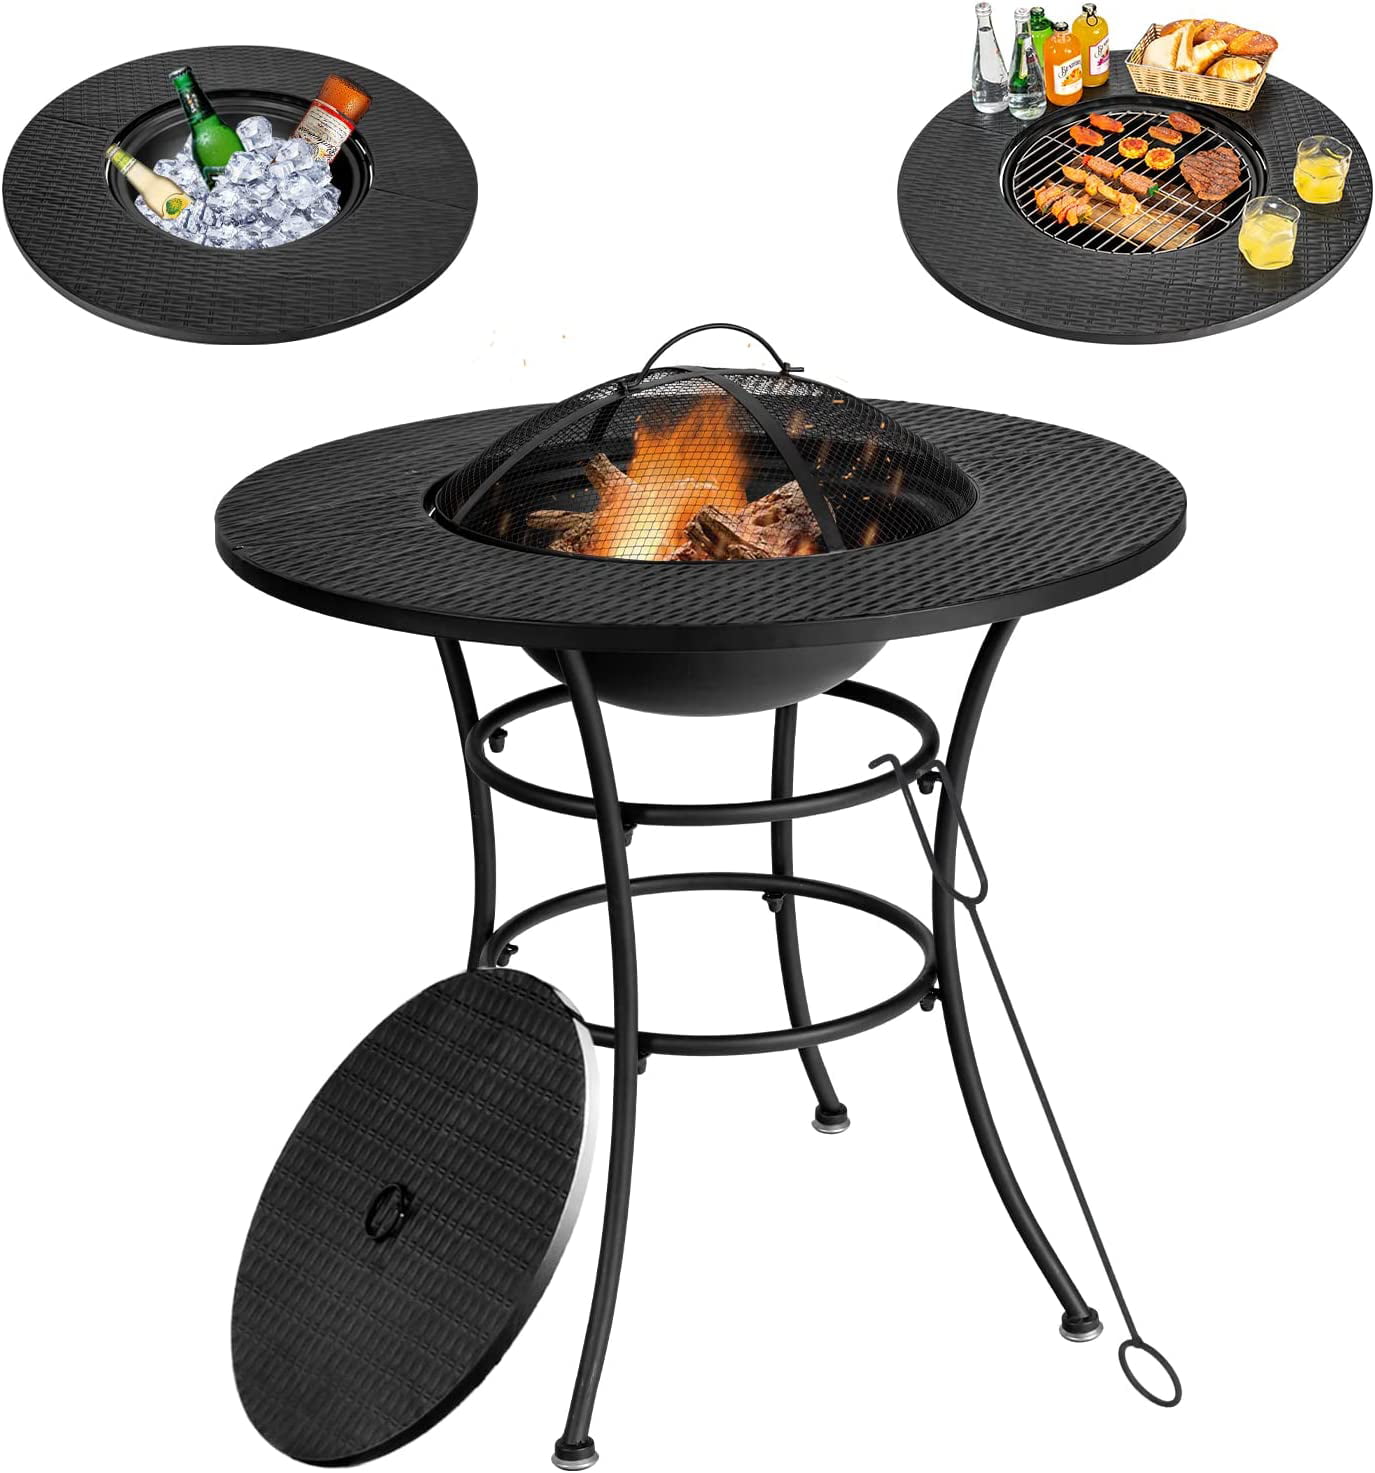 Afgift lukker ozon 32 Inch Outdoor Fire Pit Dining Table, 4-in-1 Round Wood Burning Fire Pit  Bowl, Patio Steel Firepit for BBQ, Bonfire, Camping, Includes Fire Poker,  Cover, Grill, Log Grate, Spark Screen Cover -